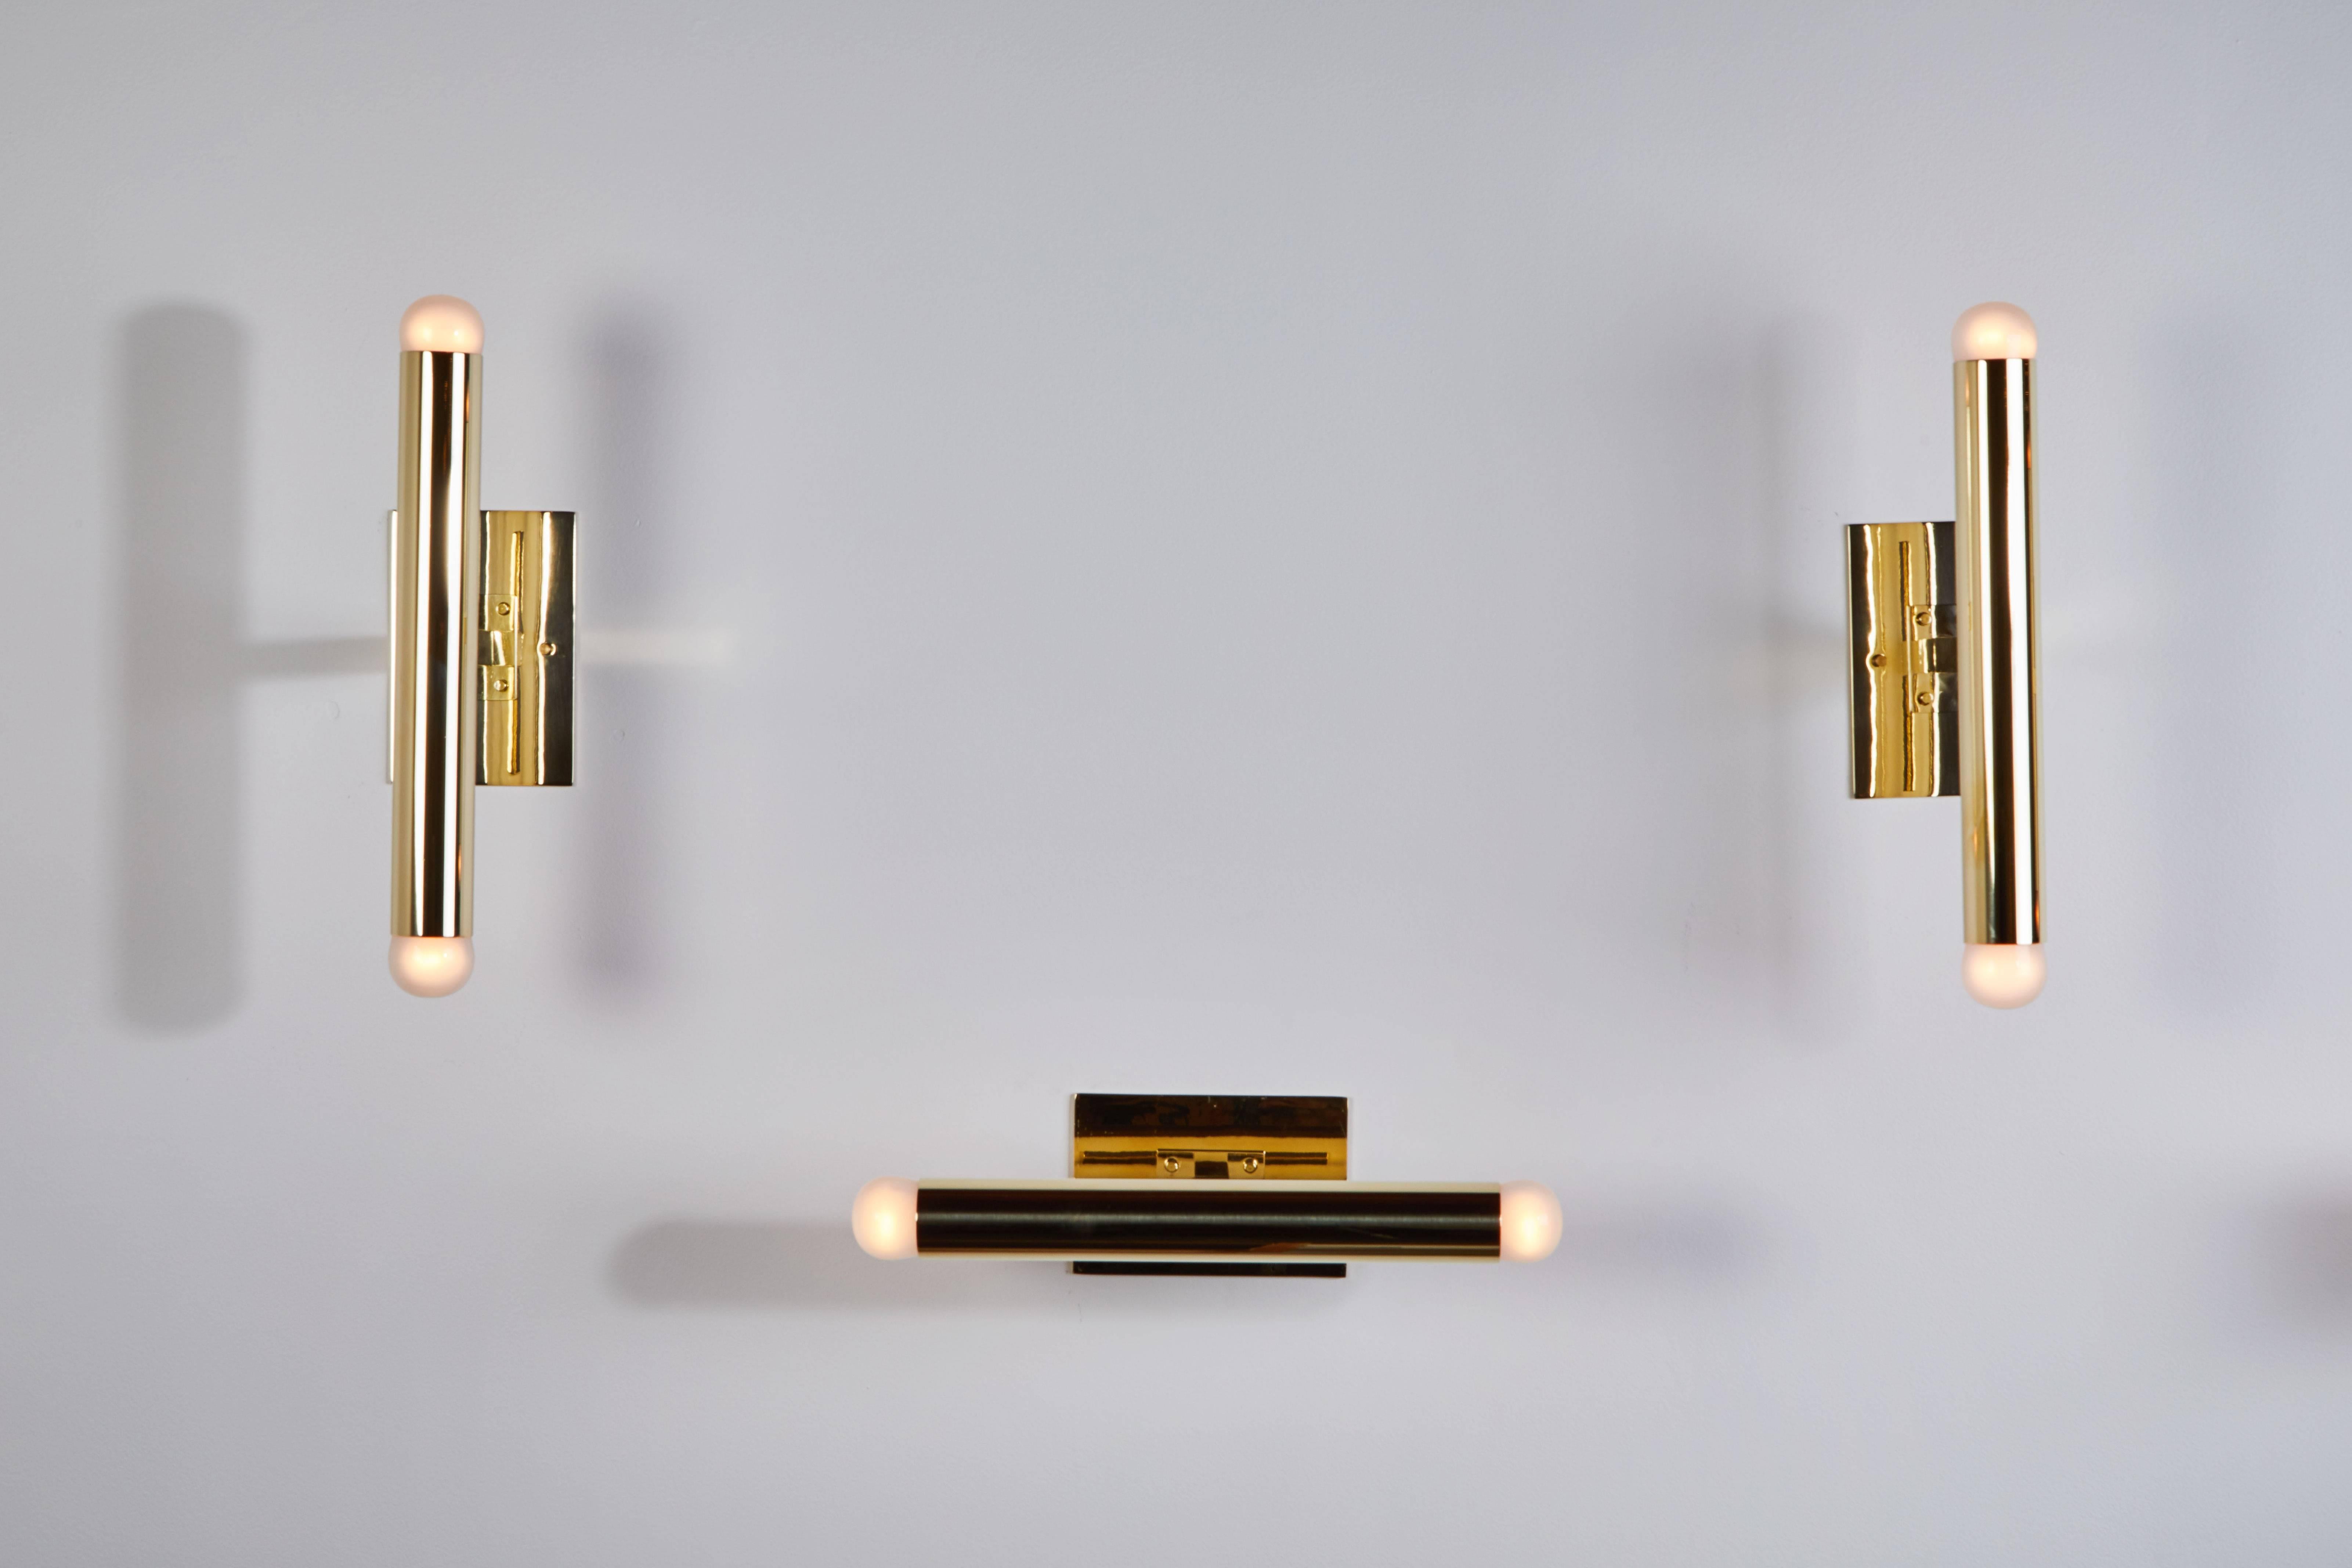 Single brass tubular sconce designed in Italy circa 1960s. Custom backplates, can be mounted horizontally or vertically. Wired for US junction boxes. Each sconce takes two E14 European candelabra. Only one available.